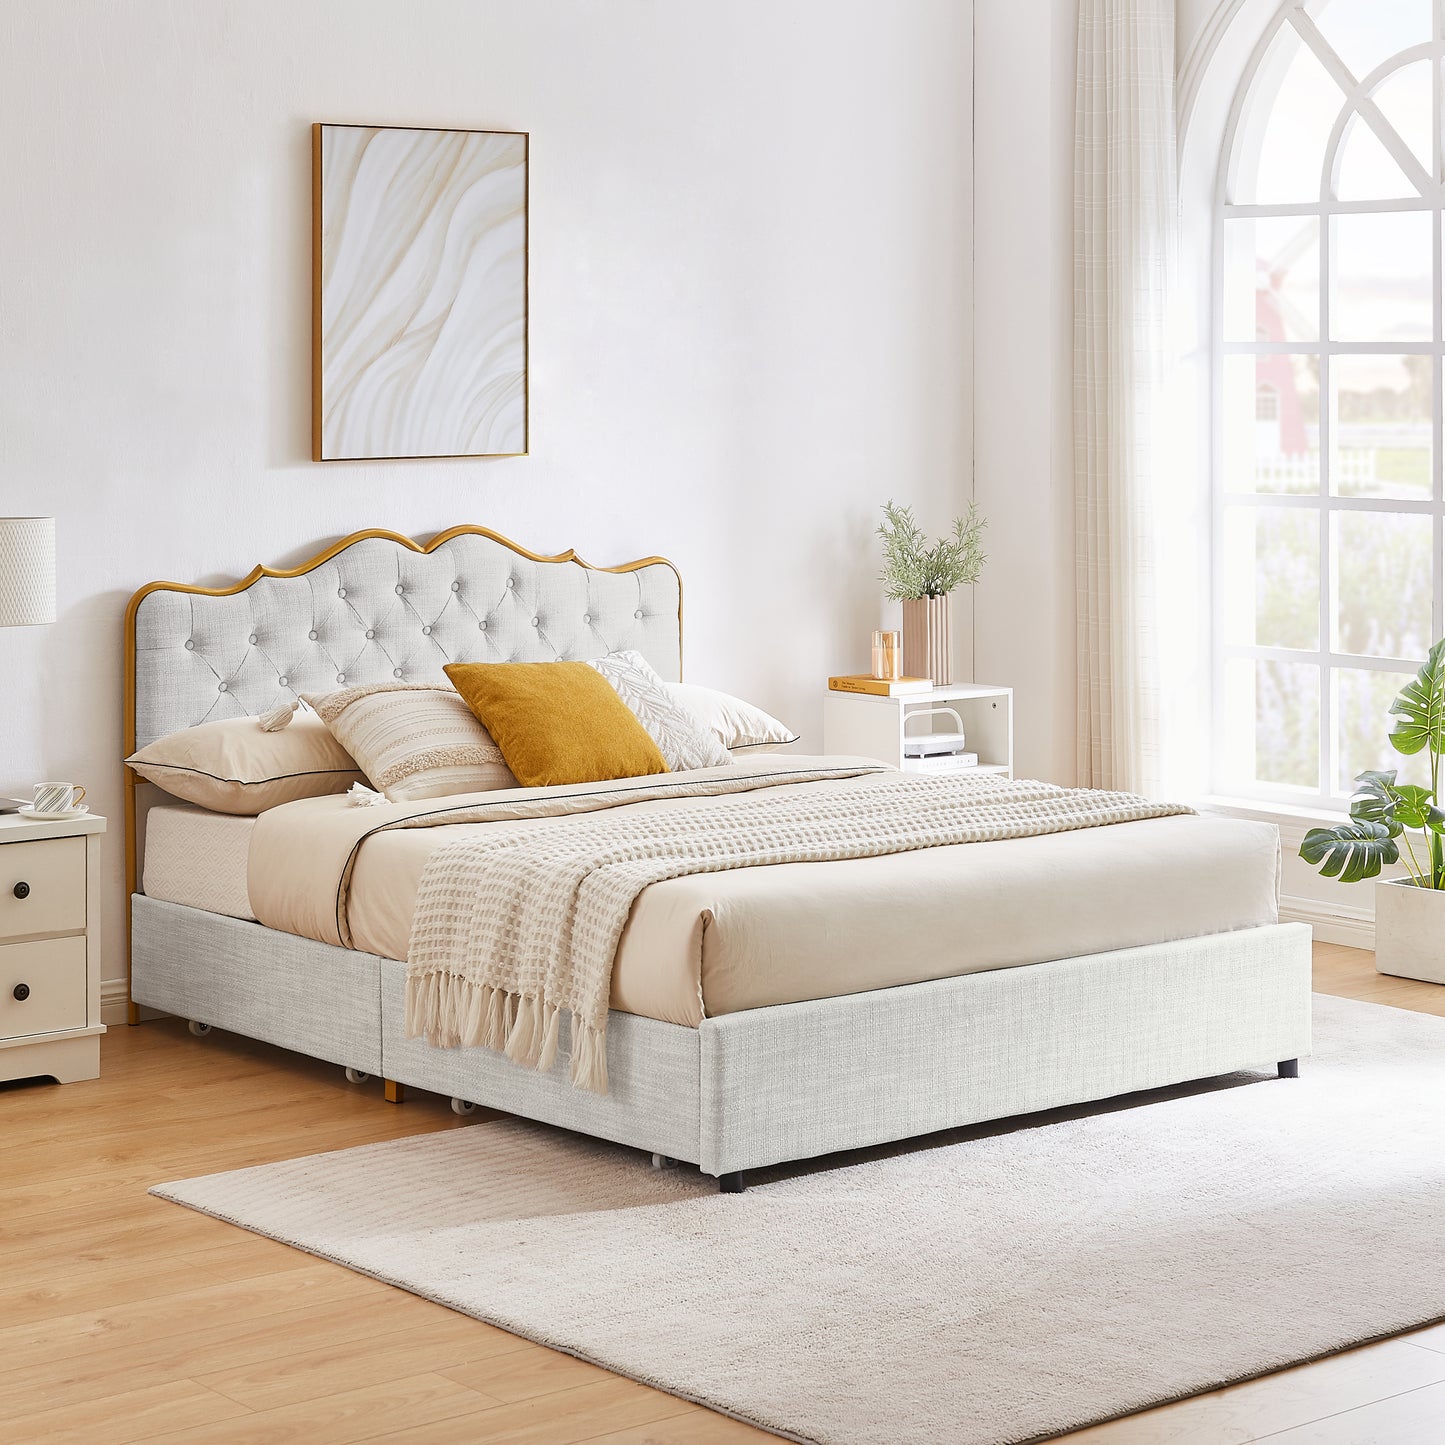 Queen Size Upholstered Platform Bed with 4 Storage Drawers, Classic Steamed Bread Shaped Backrest - Light Gray